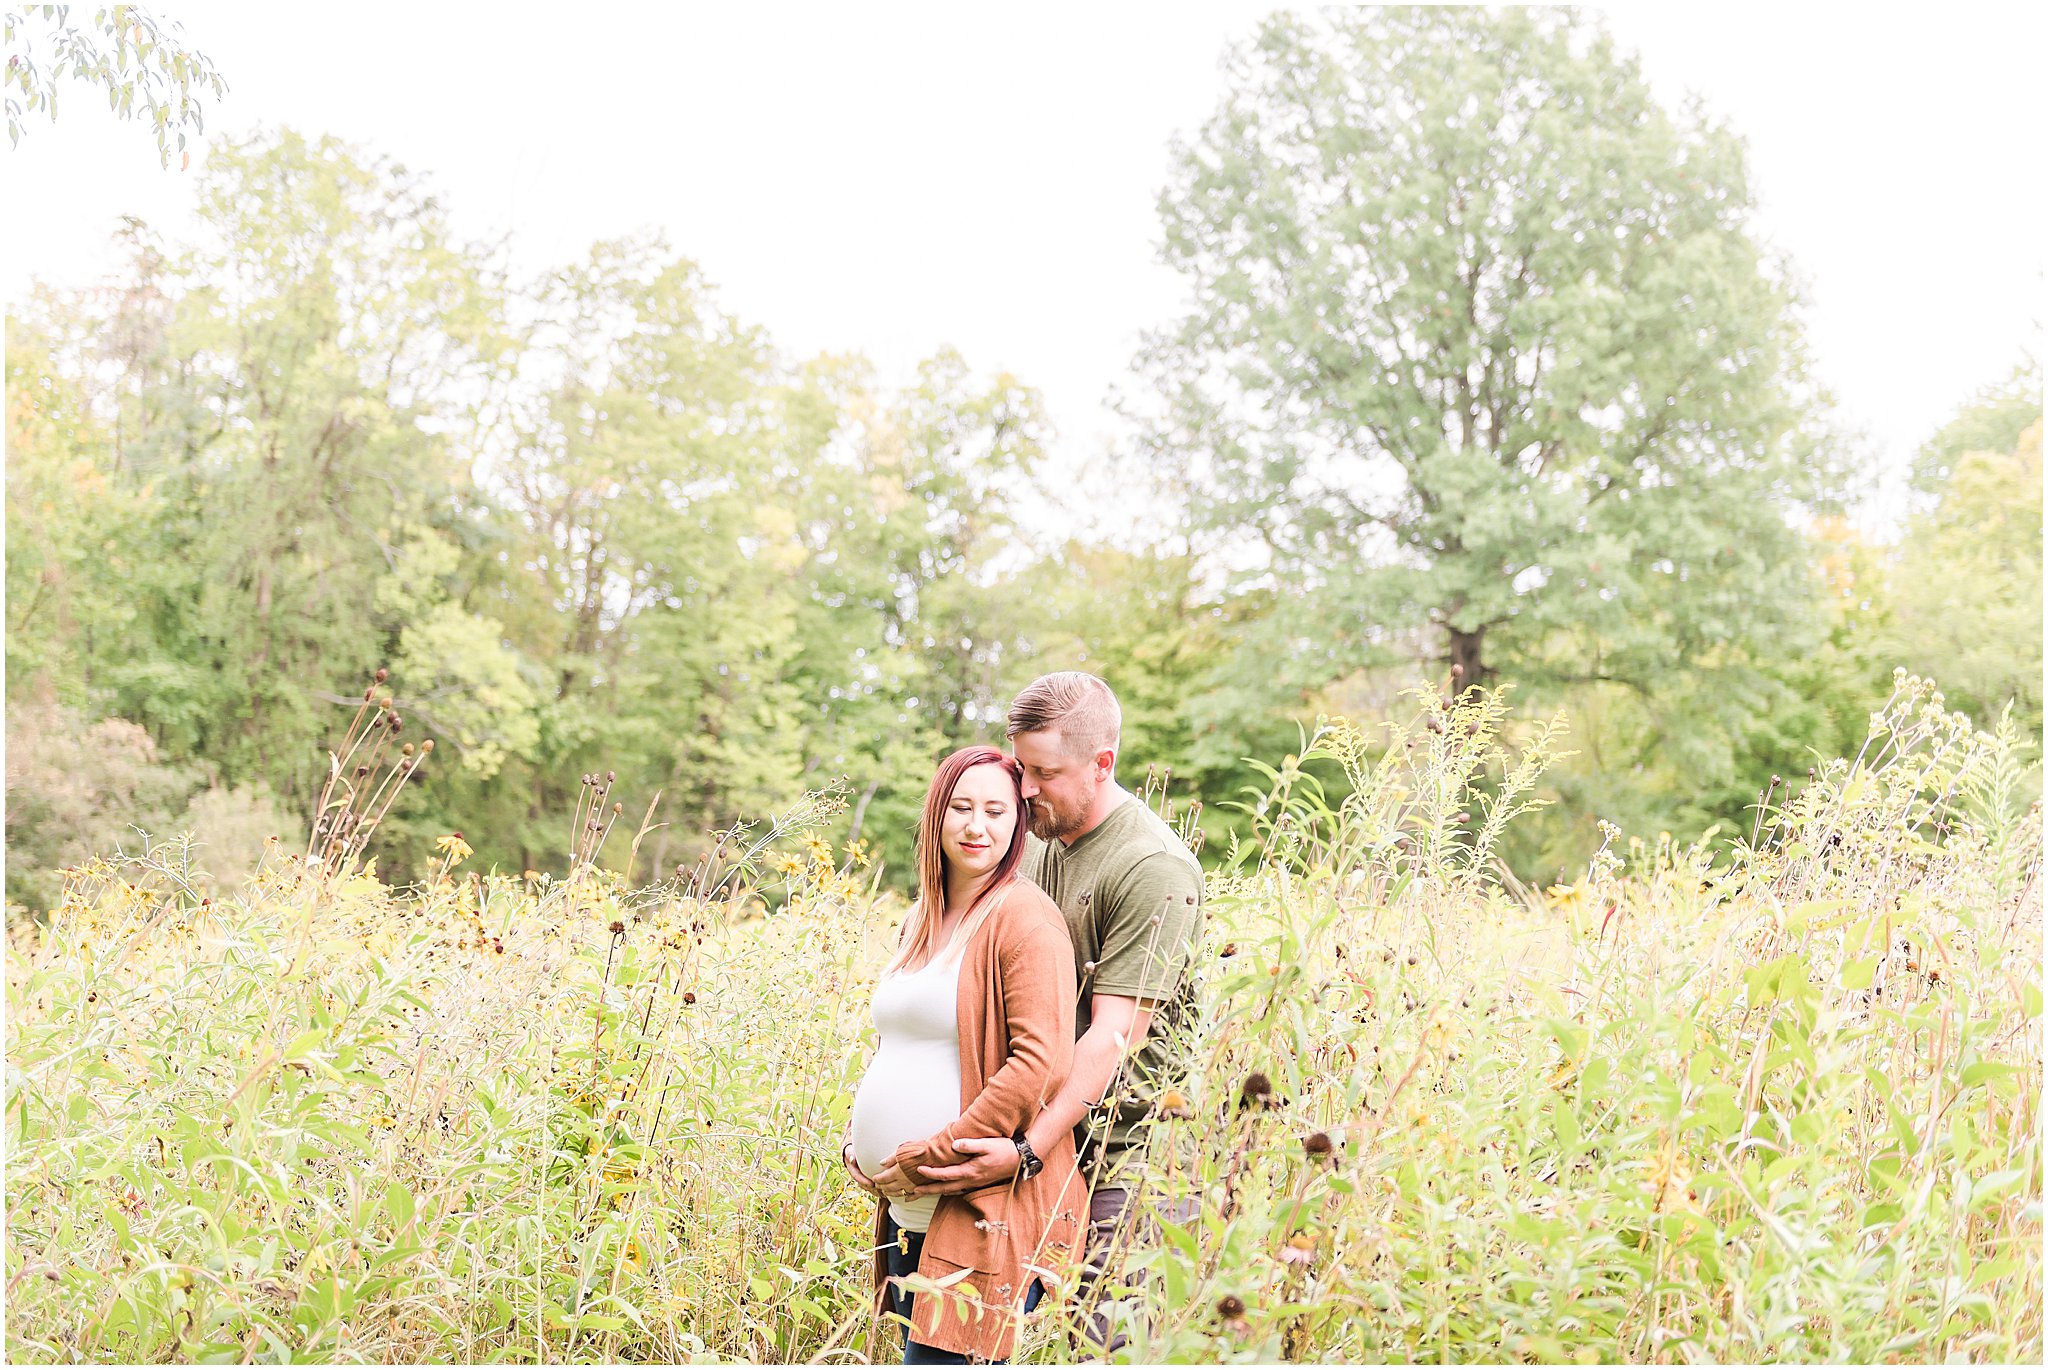 Pregnant woman softly looking over shoulder during Eagle Creek Park maternity session